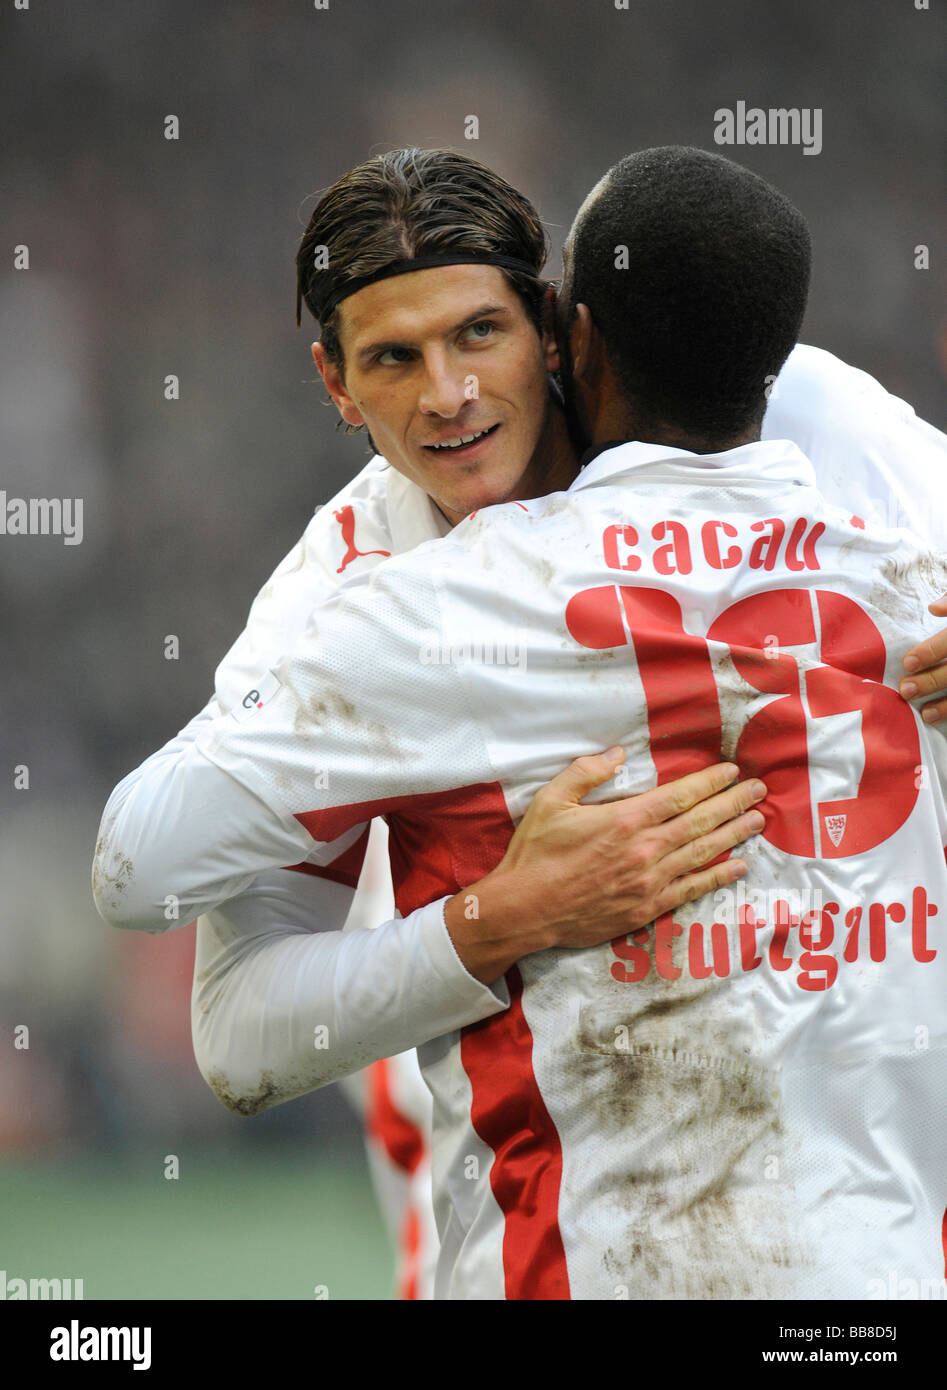 Mario Gomez, left, and Cacau, right, from VfB Stuttgart, celebration after scoring a goal Stock Photo